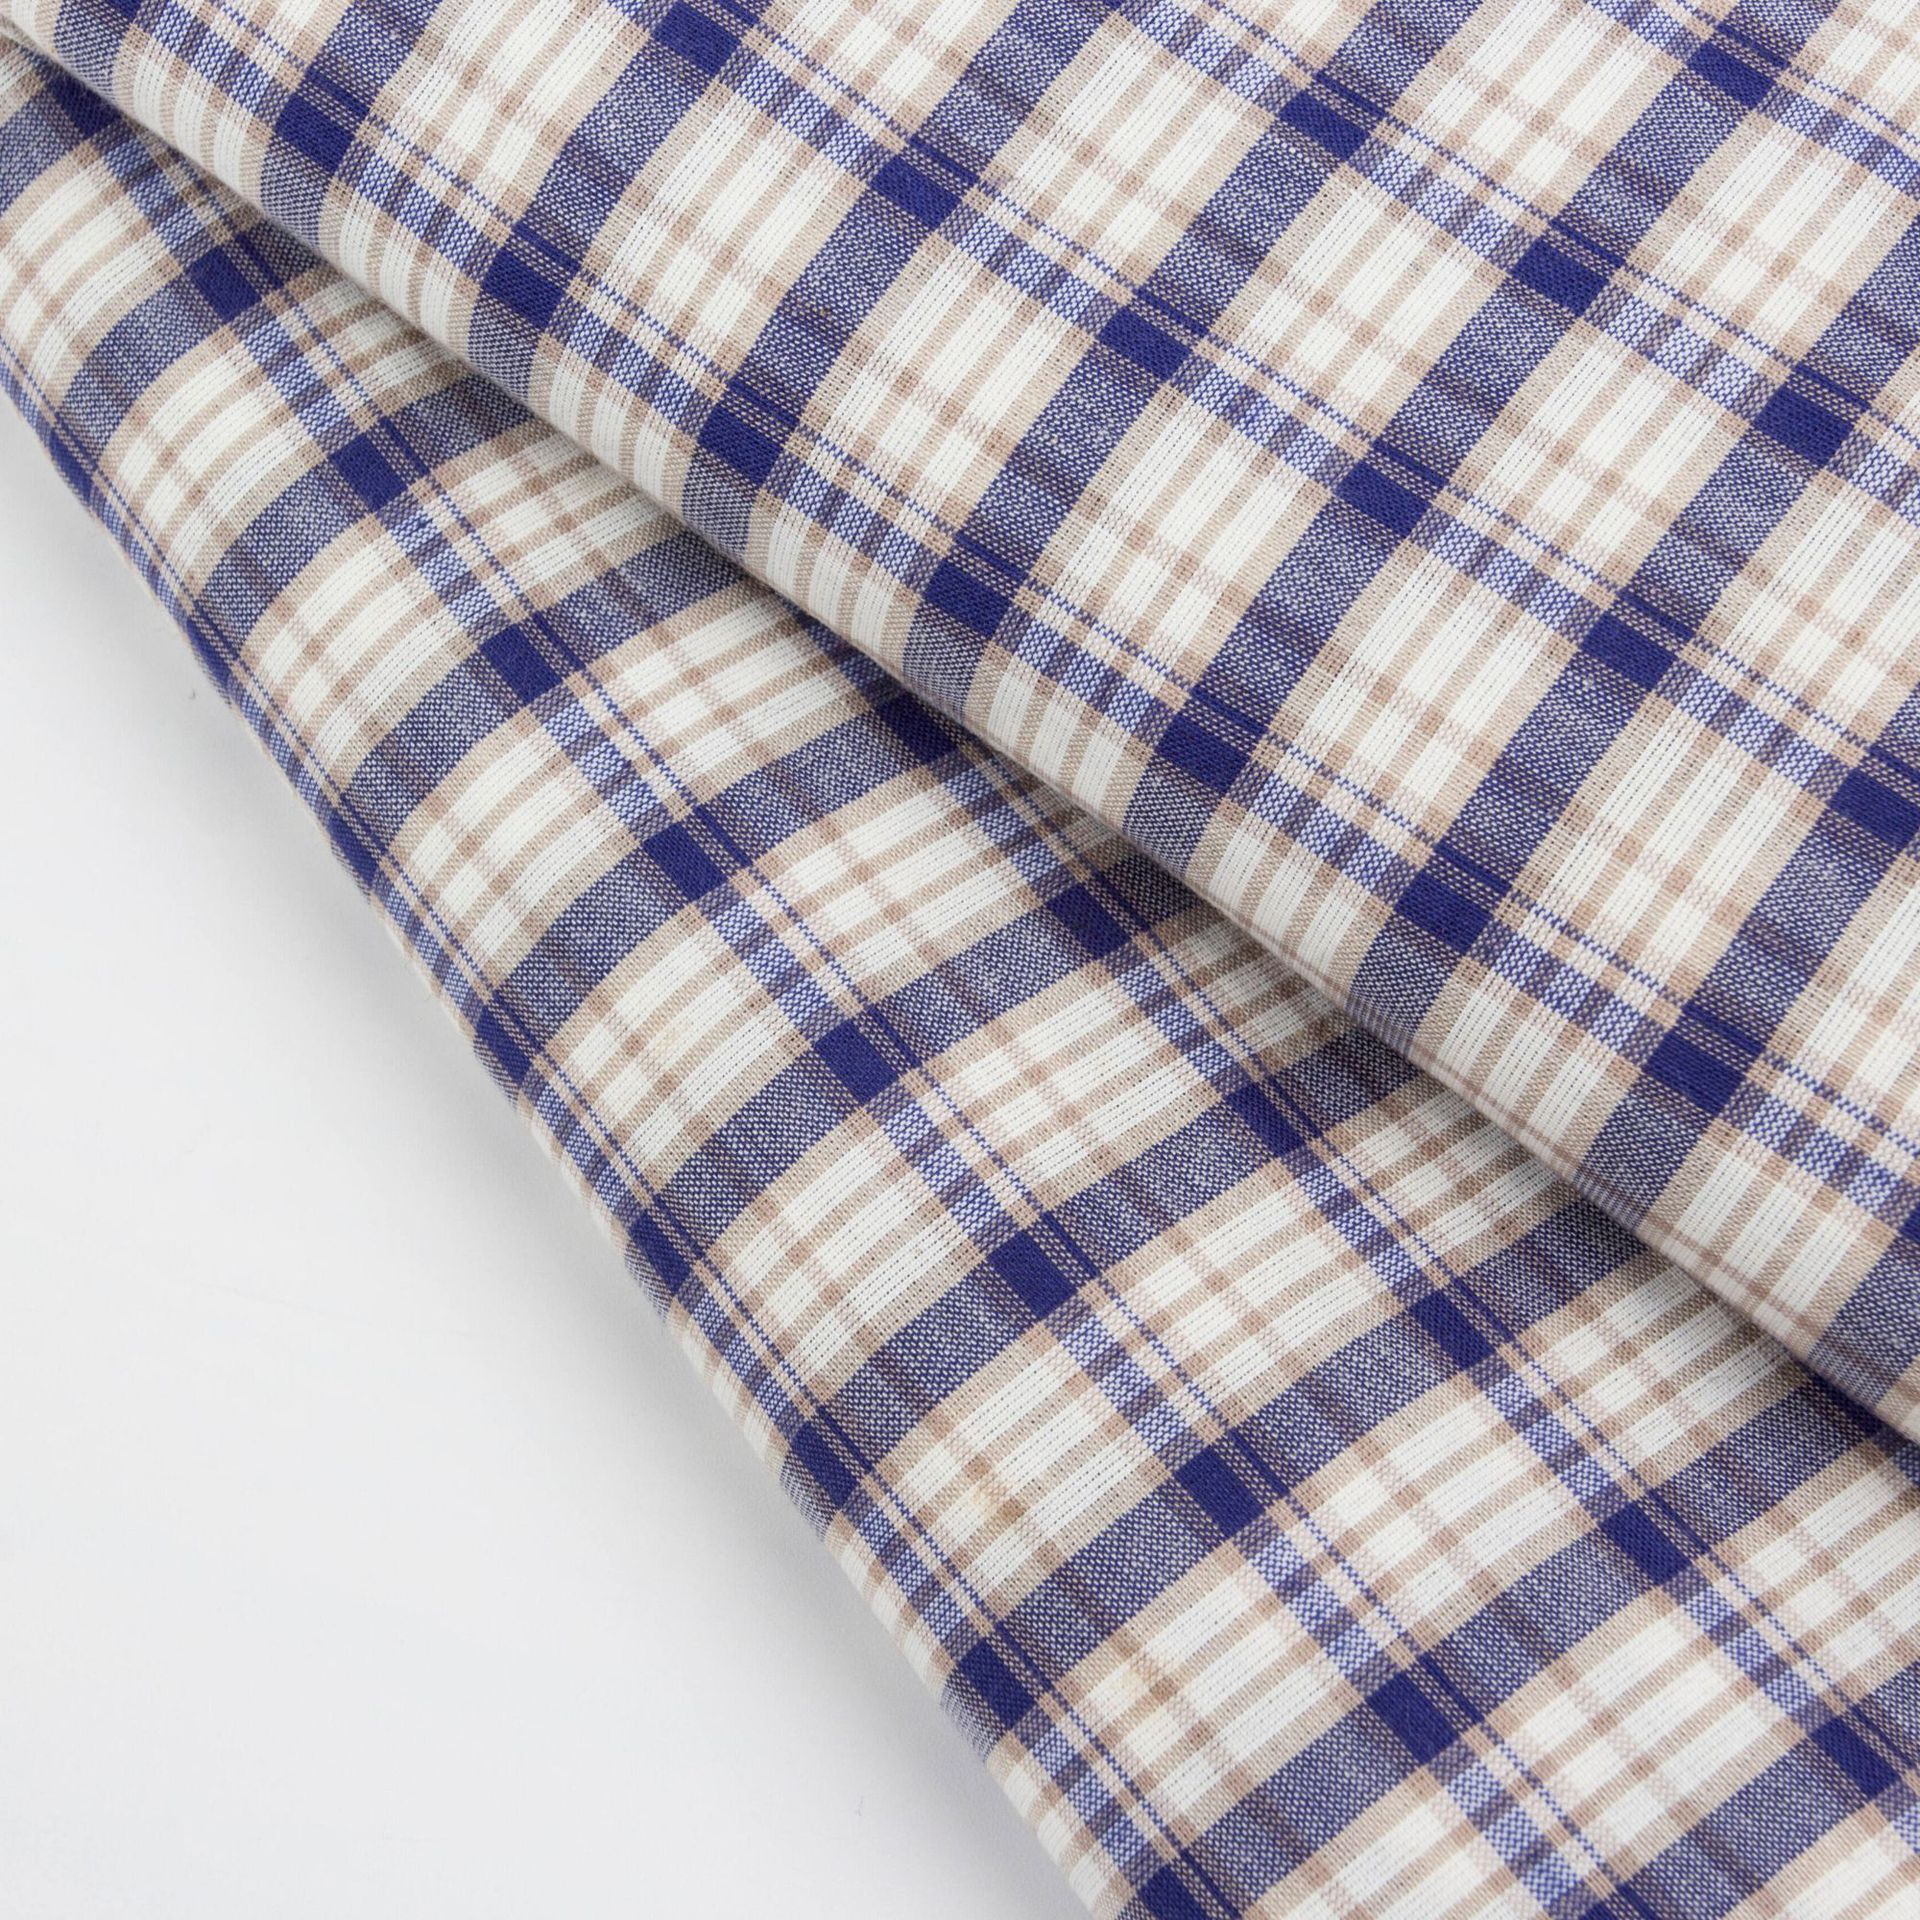 Polyester Cotton Yarn-Dyed Shirt's Fabric Plaid Clothing Fabric Can Be Sample Production and Processing Price Can Be Discussed